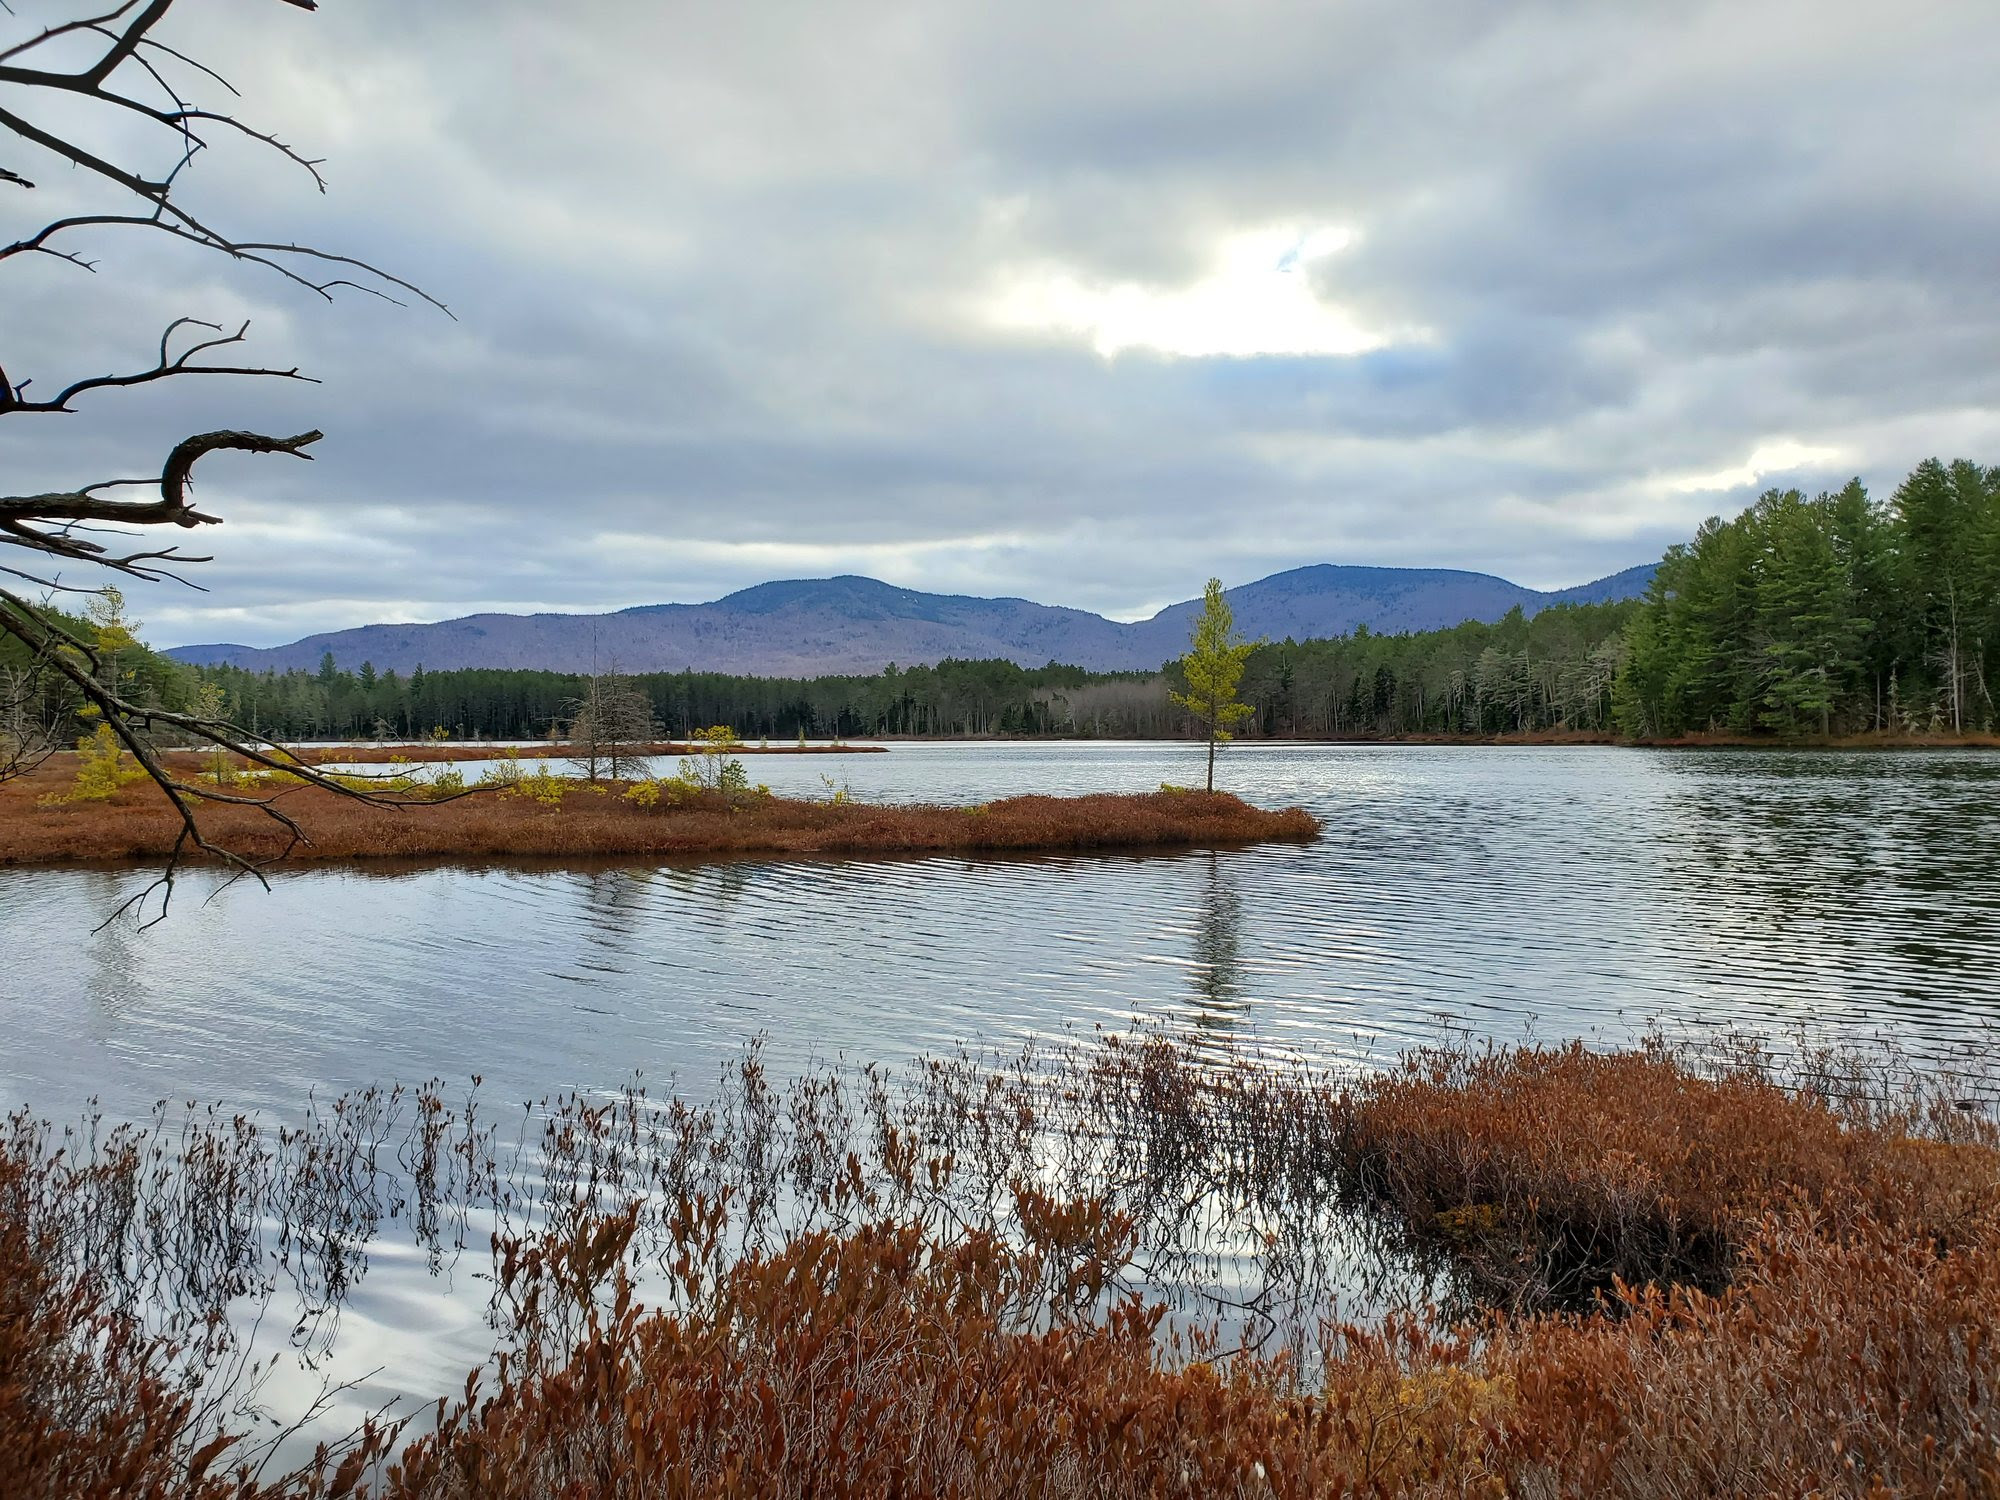 Adirondack pond with mountains in background